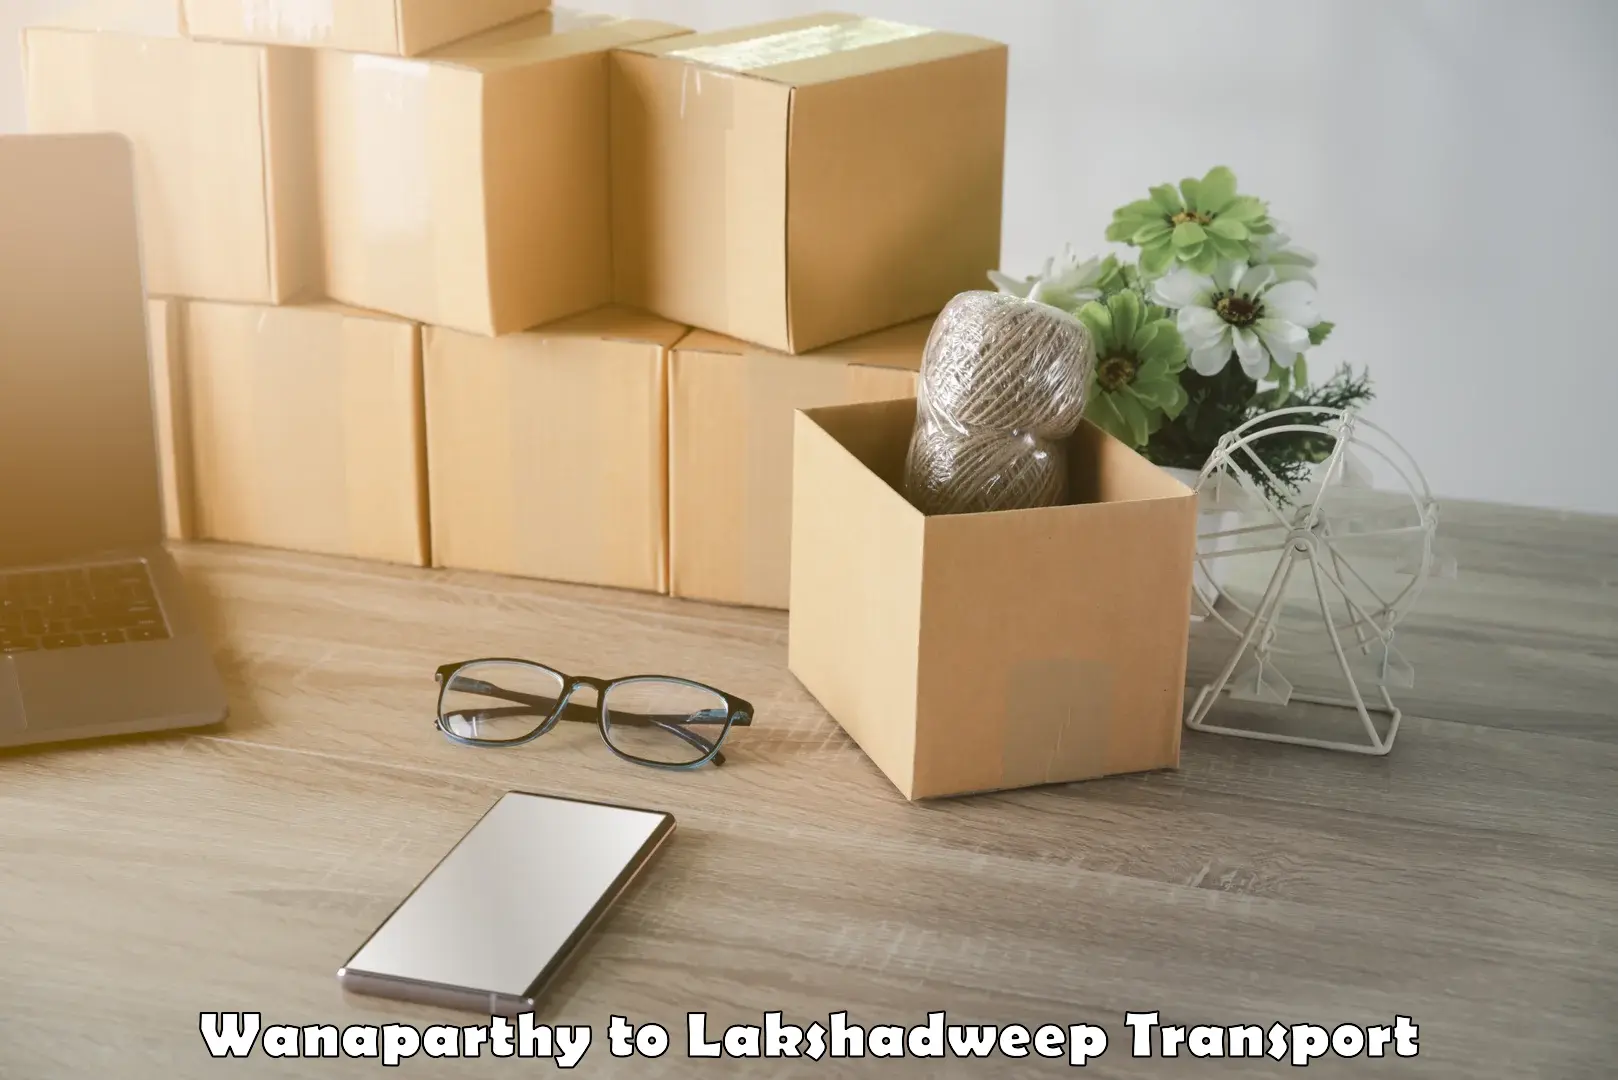 Vehicle transport services Wanaparthy to Lakshadweep